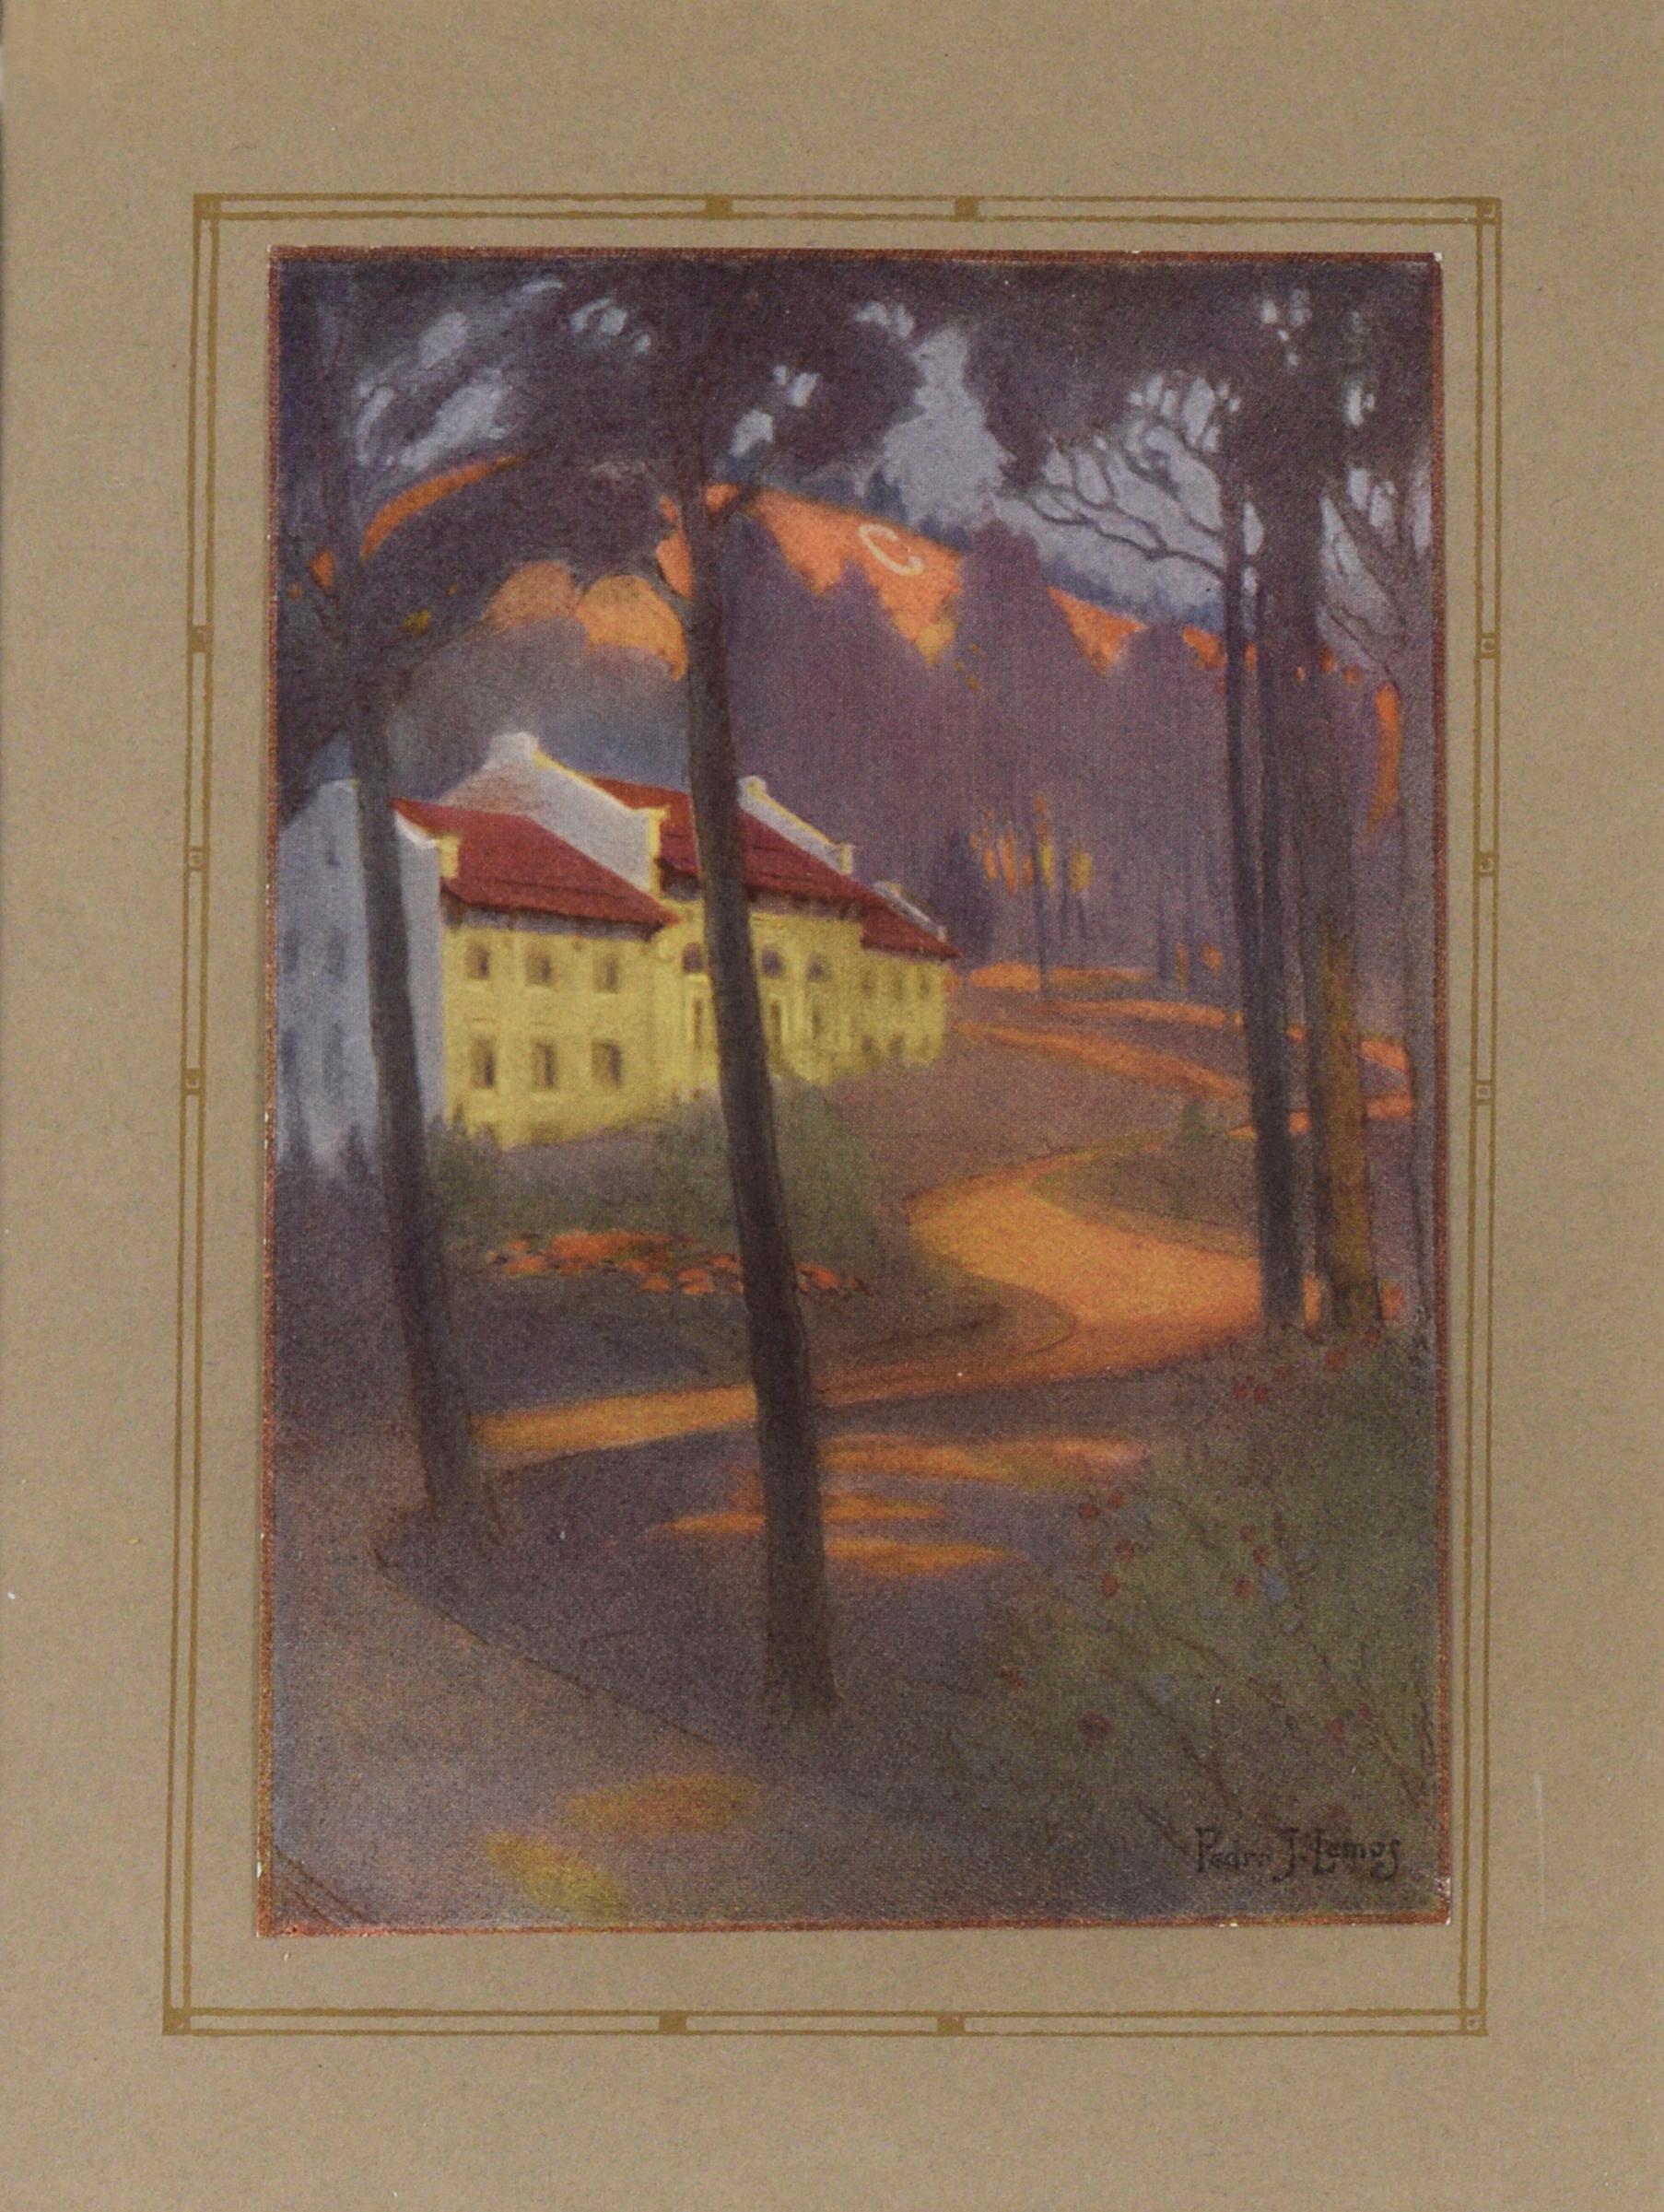 „The Mining Building From The Road“ - 1921 UC Berkeley Jahrebuch Farblithographie „The Mining Building From The Road“ – Print von Pedro Lemos